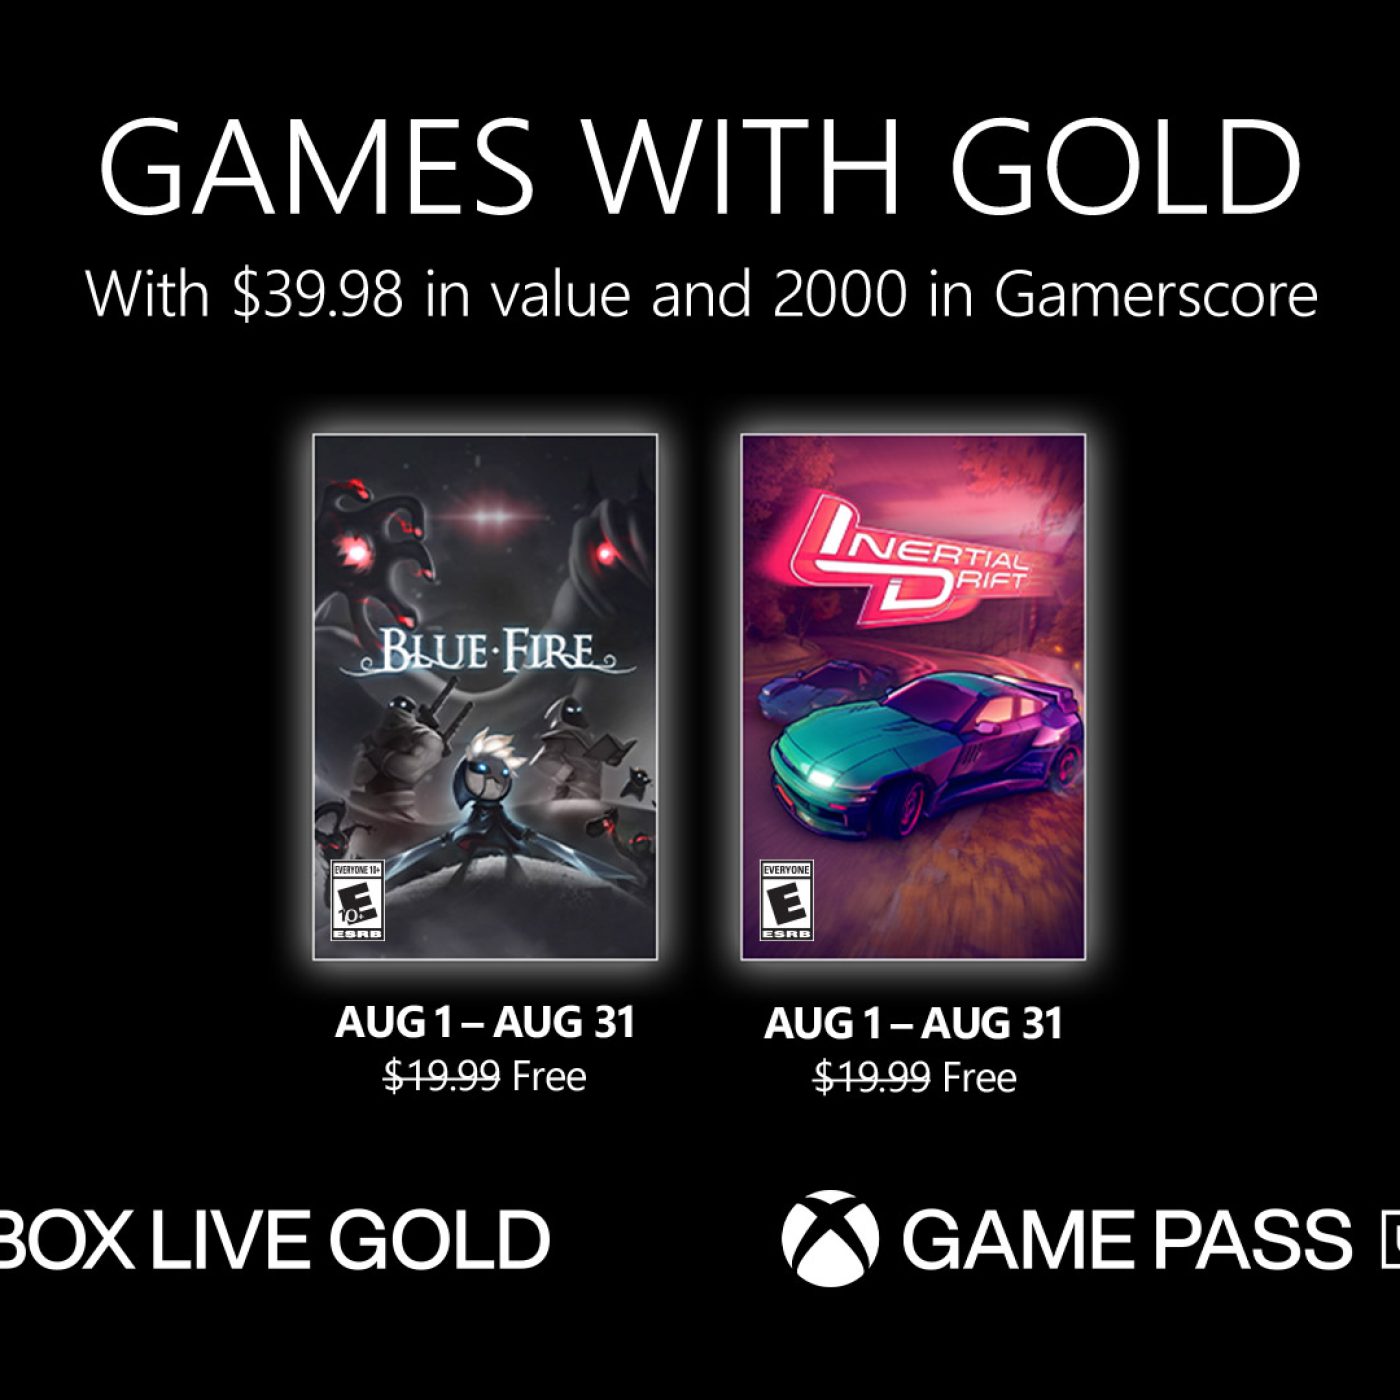 Xbox Games With Gold handed out $900 worth of games in 2015. Was